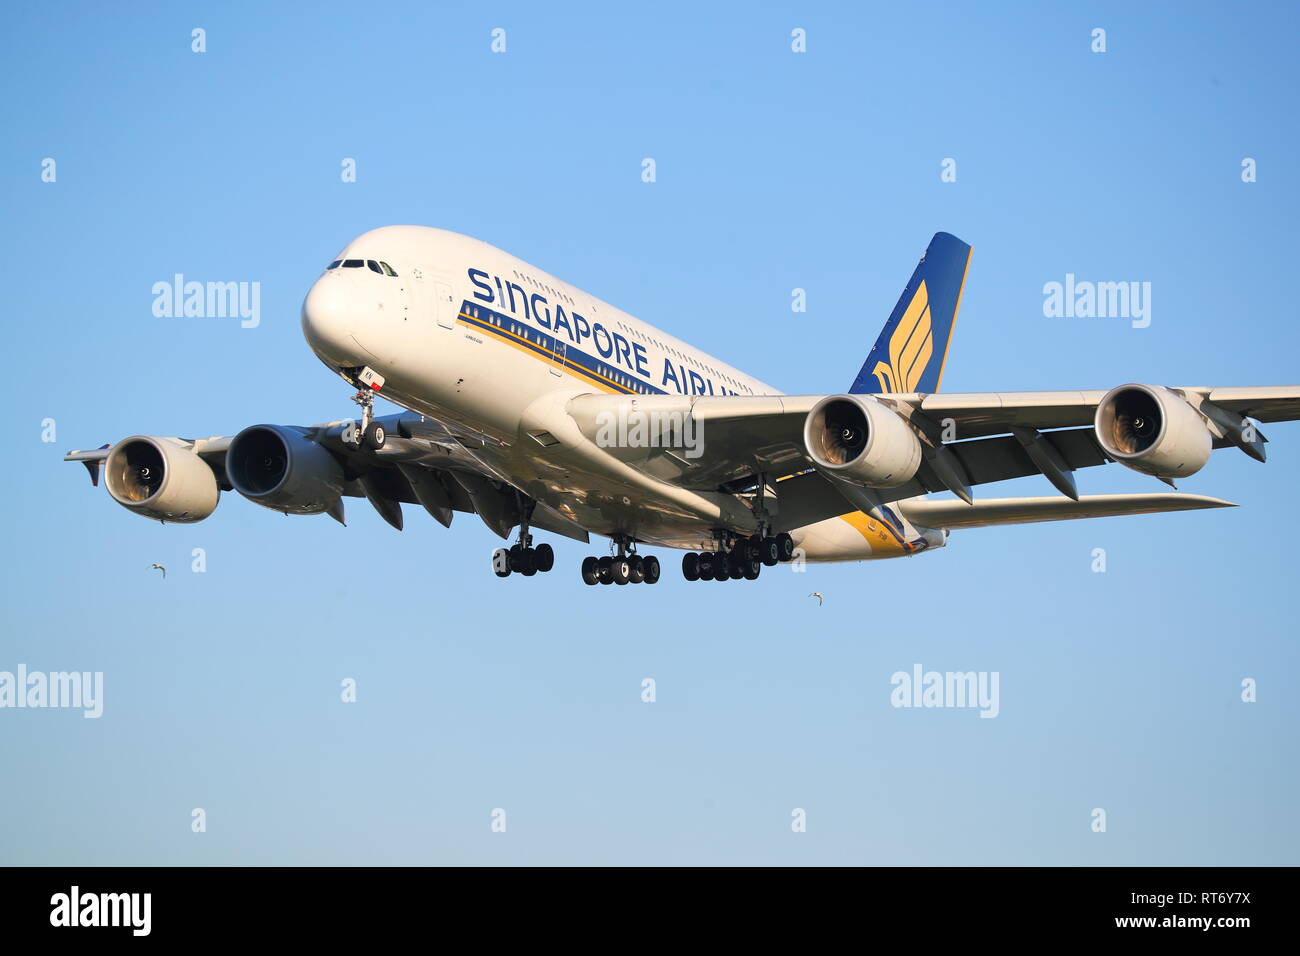 Singapore Airlines Airbus A380 9V-SKN landing at London Heathrow Airport, UK Stock Photo